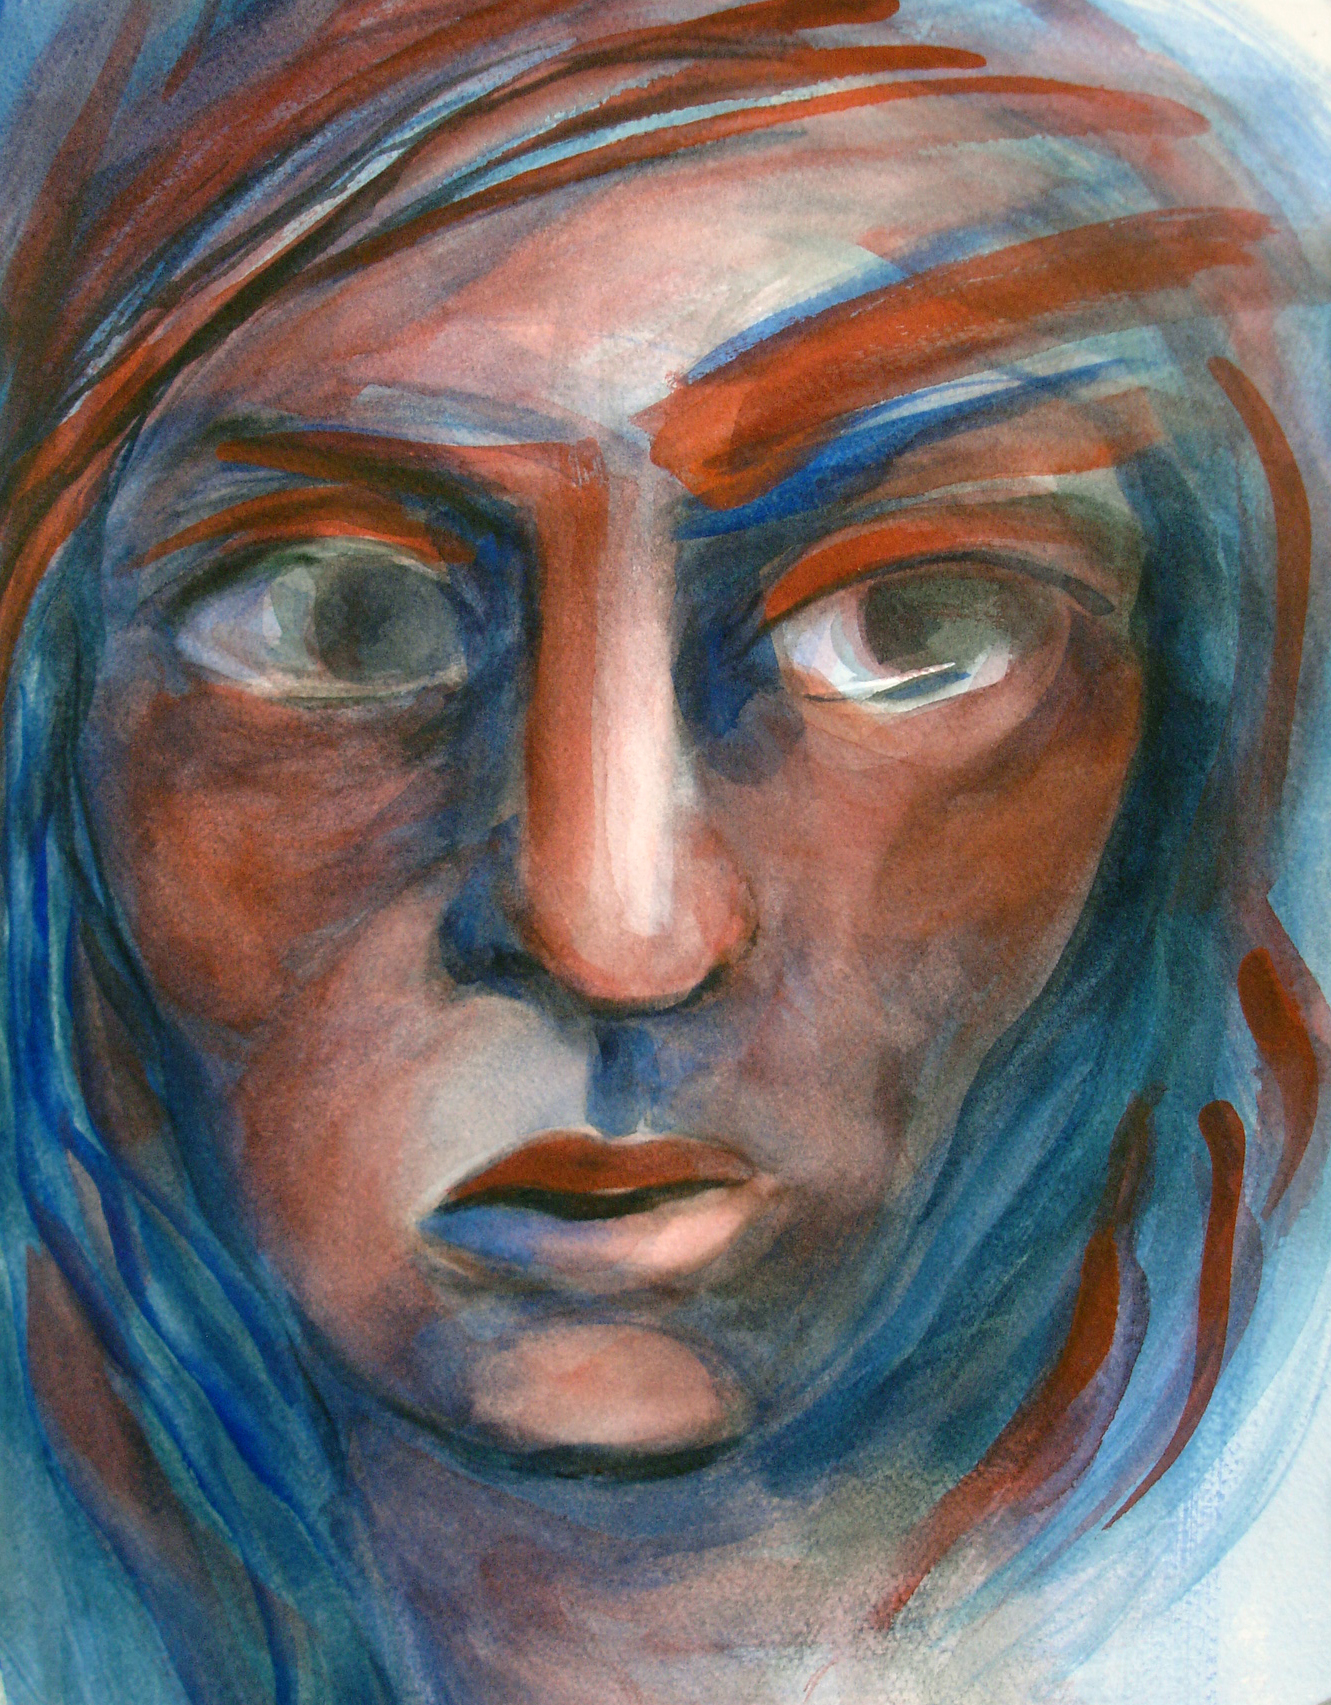 "What Did You Say", an 11" w x 15" h watercolor, is a startled face starting to speak. 